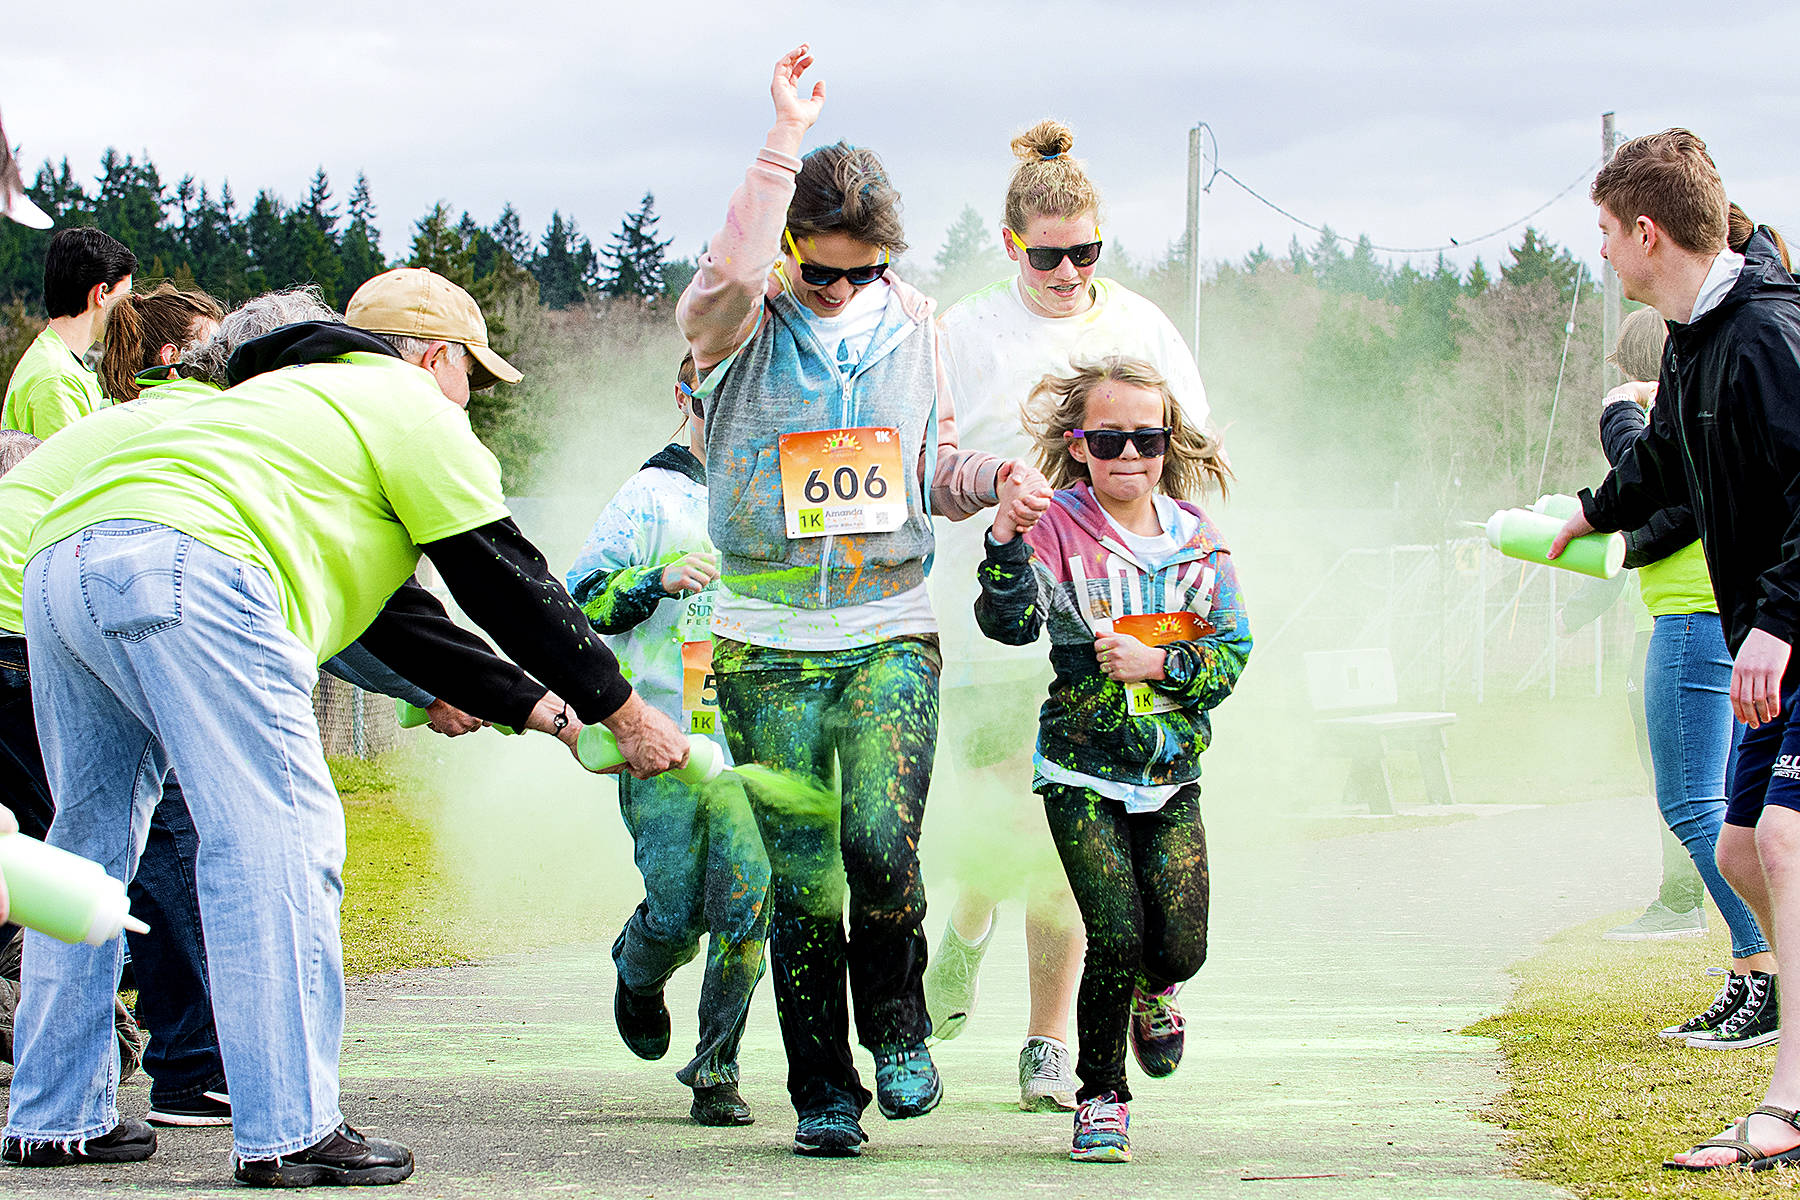 Heart and Passion Films                                Port Angeles’ Amanda and Heidi Kiddle run through the green color zone at the Sun Fun Color Run on Saturday.